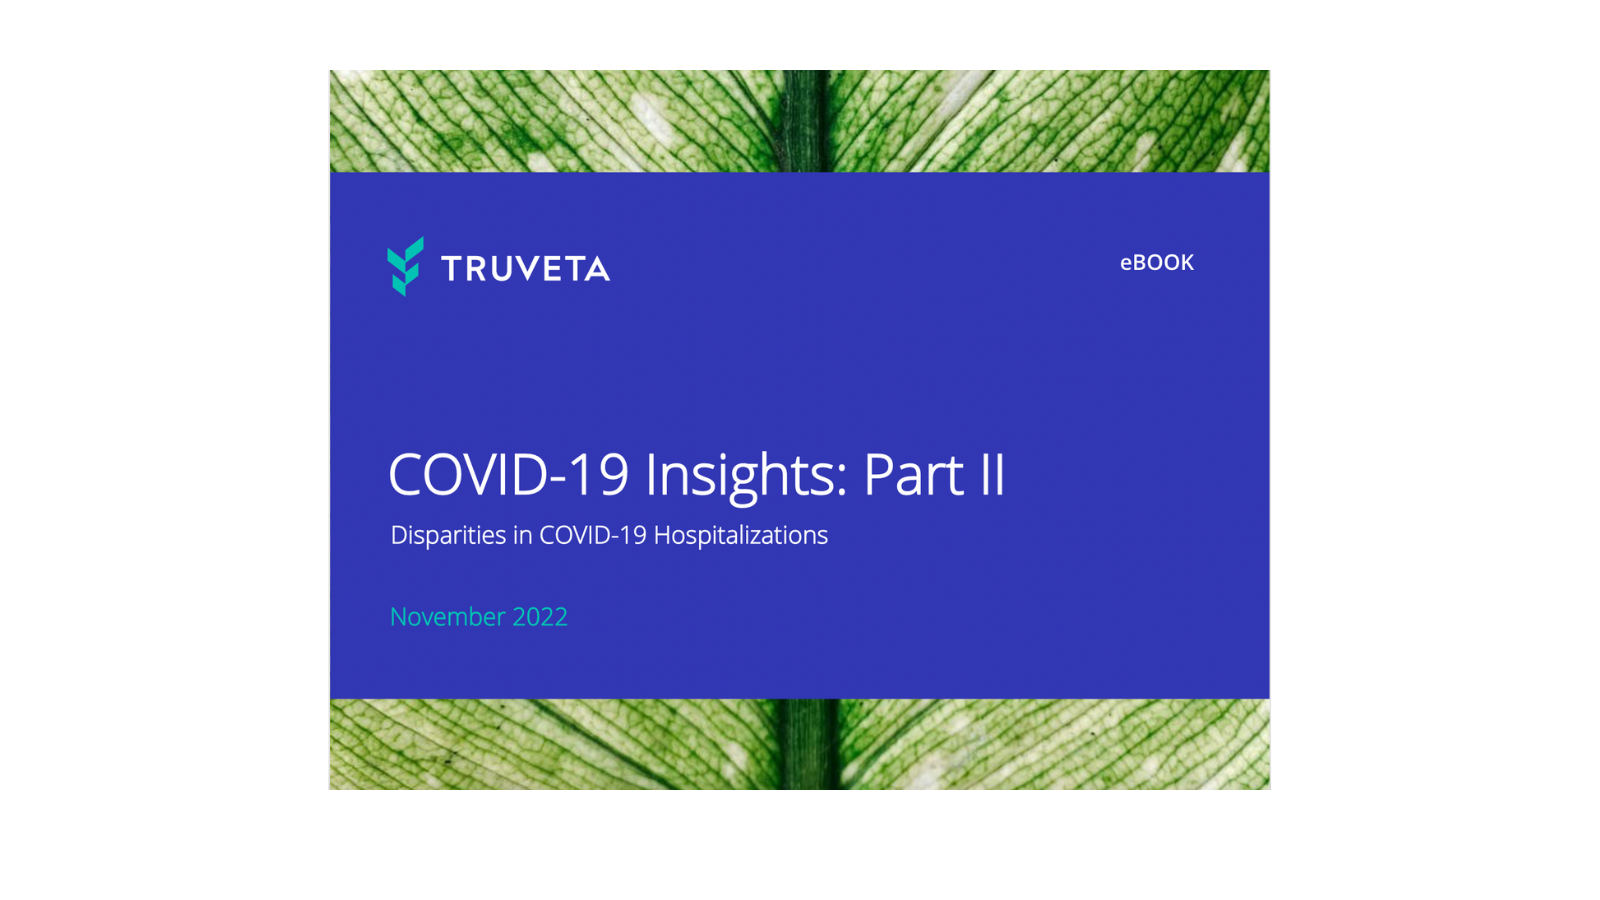 Cover of ebook - COVID-19 insights part II